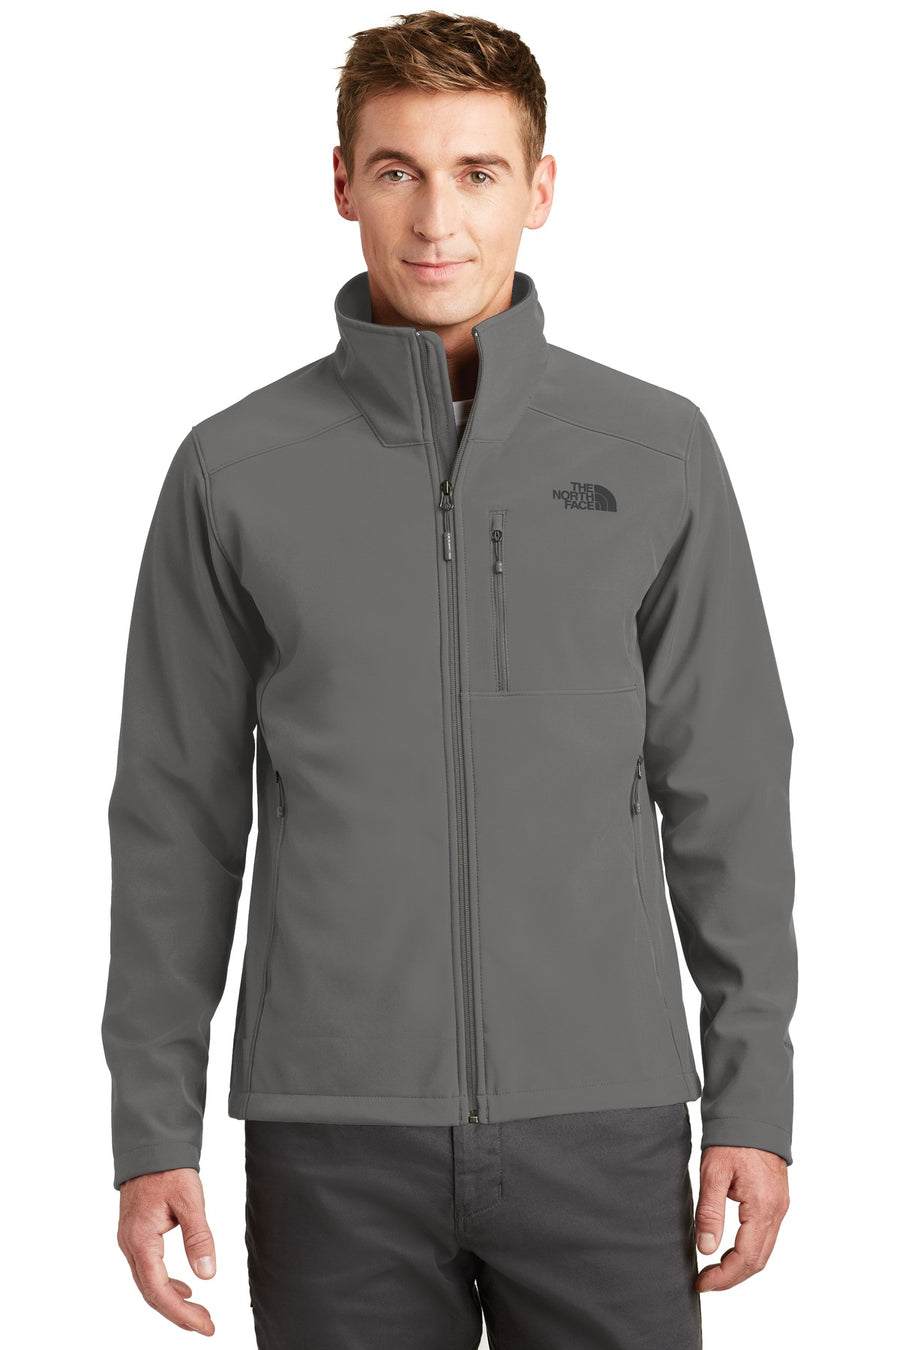 The North Face Apex Barrier Soft Shell Jacket.